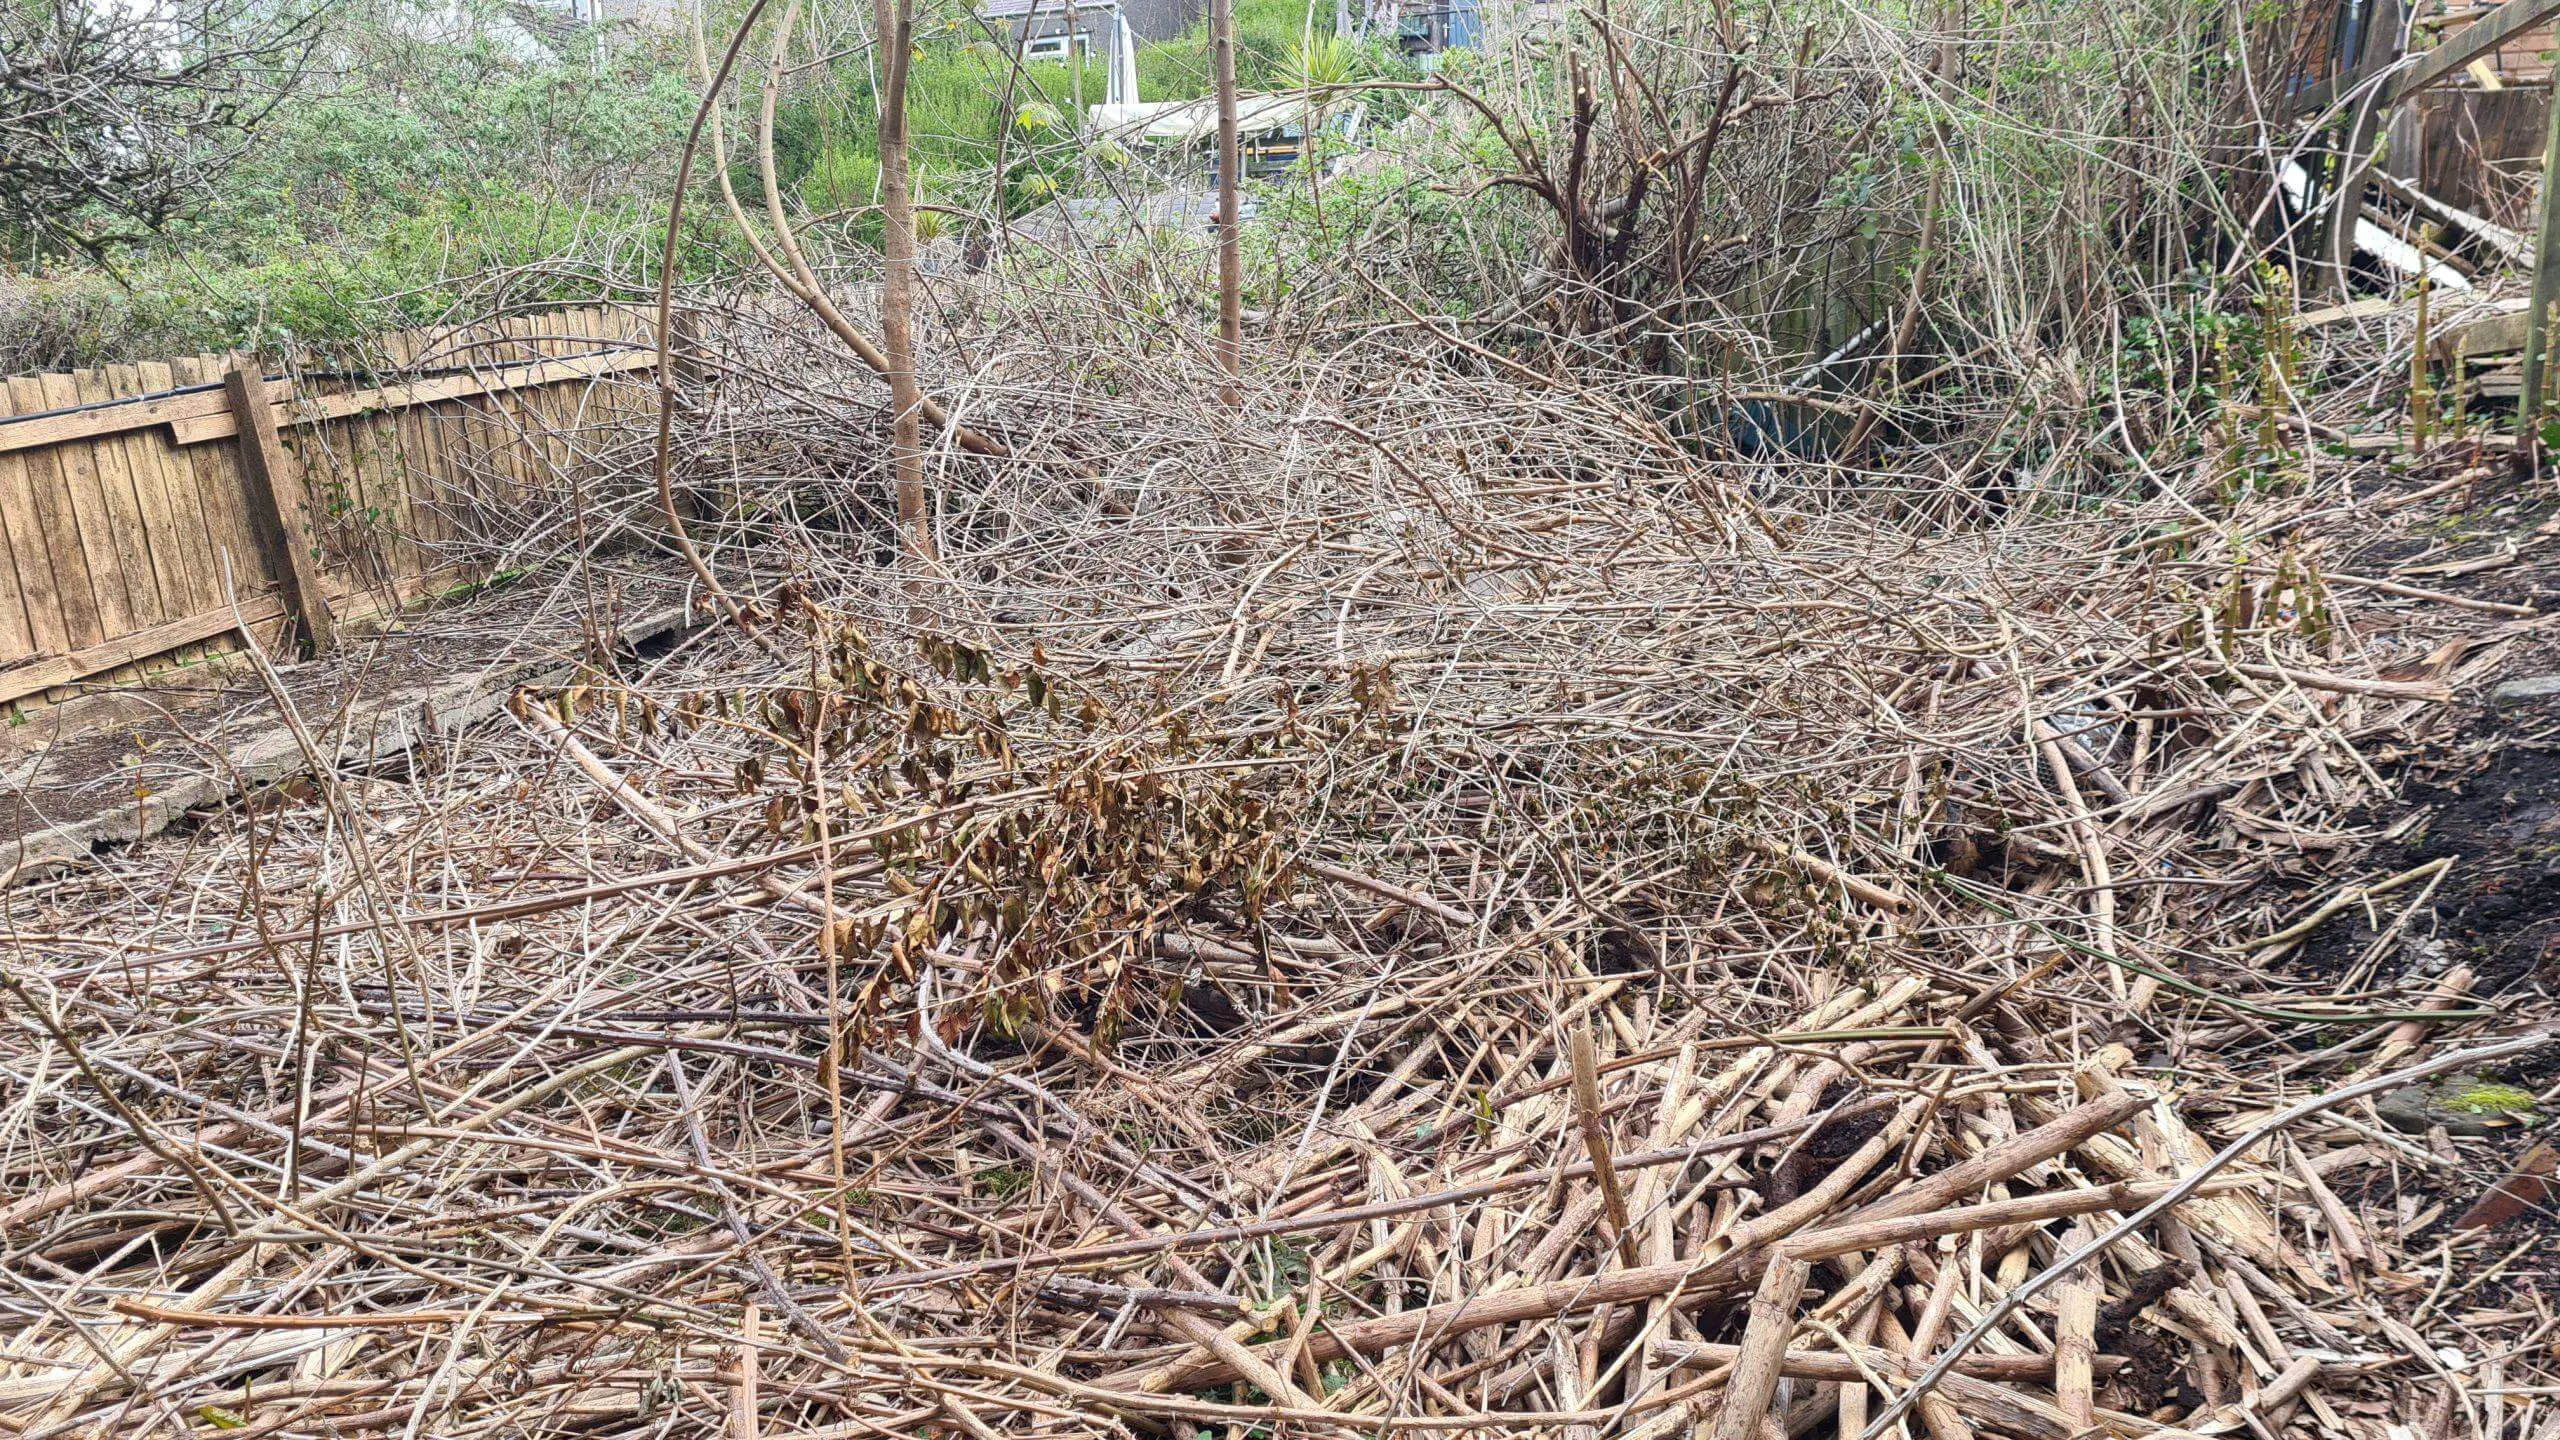 Clearing a site of dead Japanese knotweed stems and other garden debris can be costly but necessary to gain back vital outdoor space